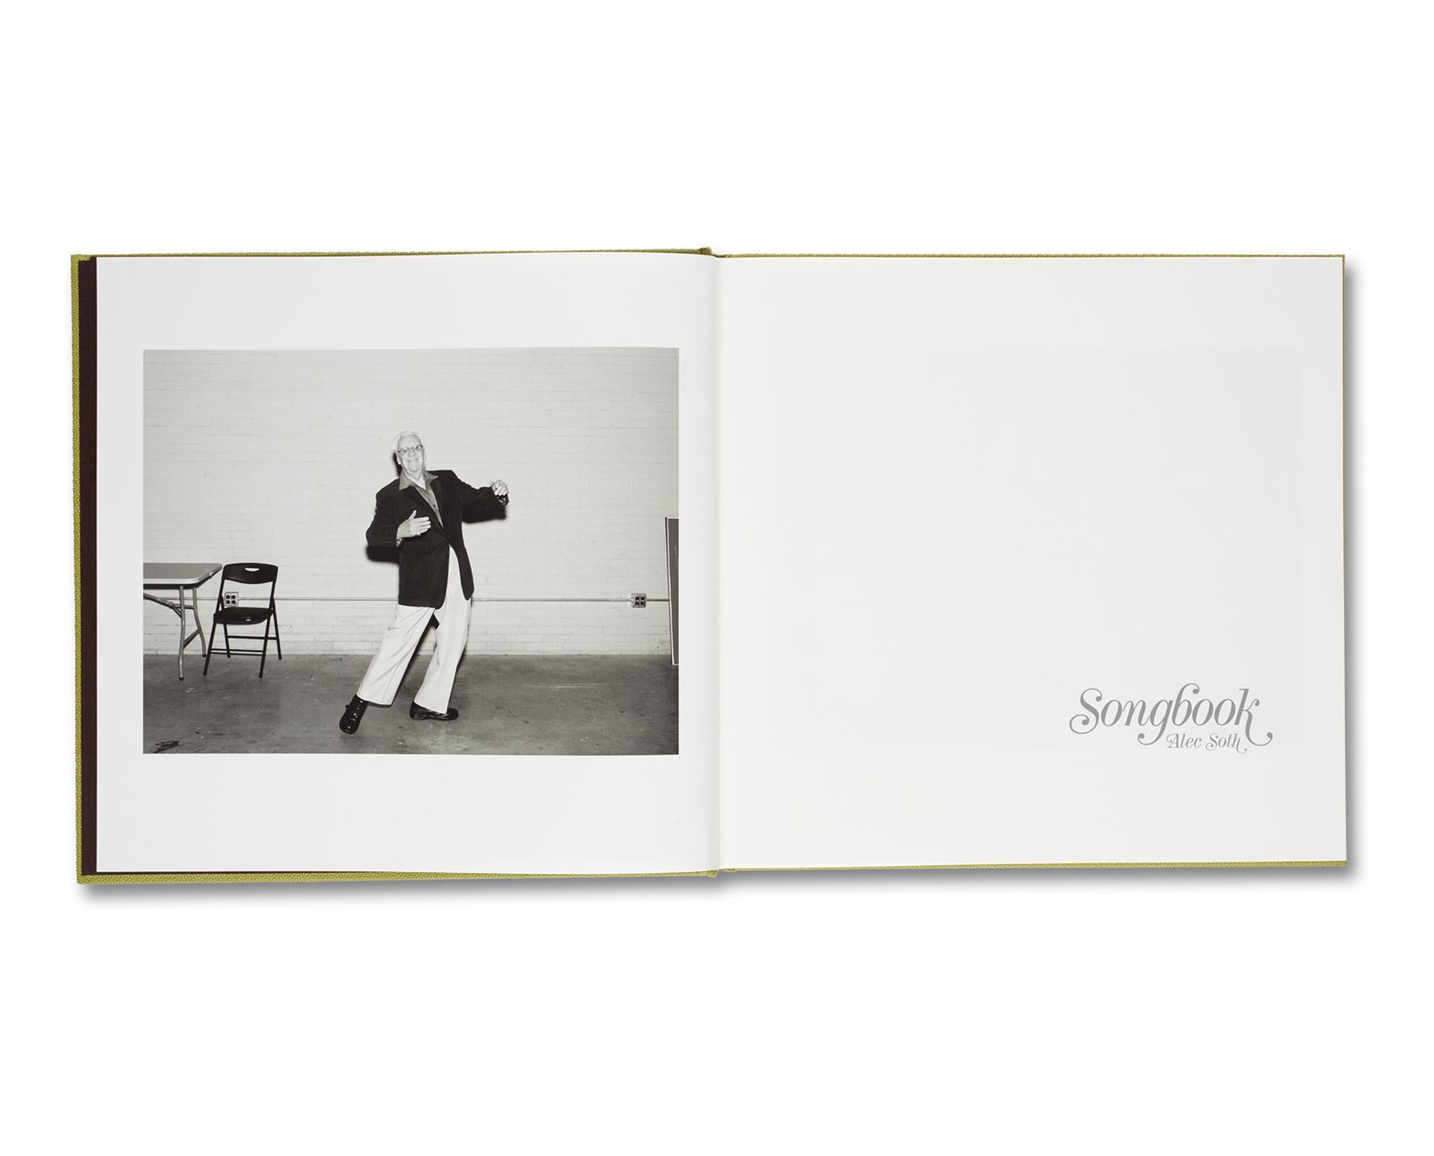 Alec Soth 'Songbook' (signed) - Fragment